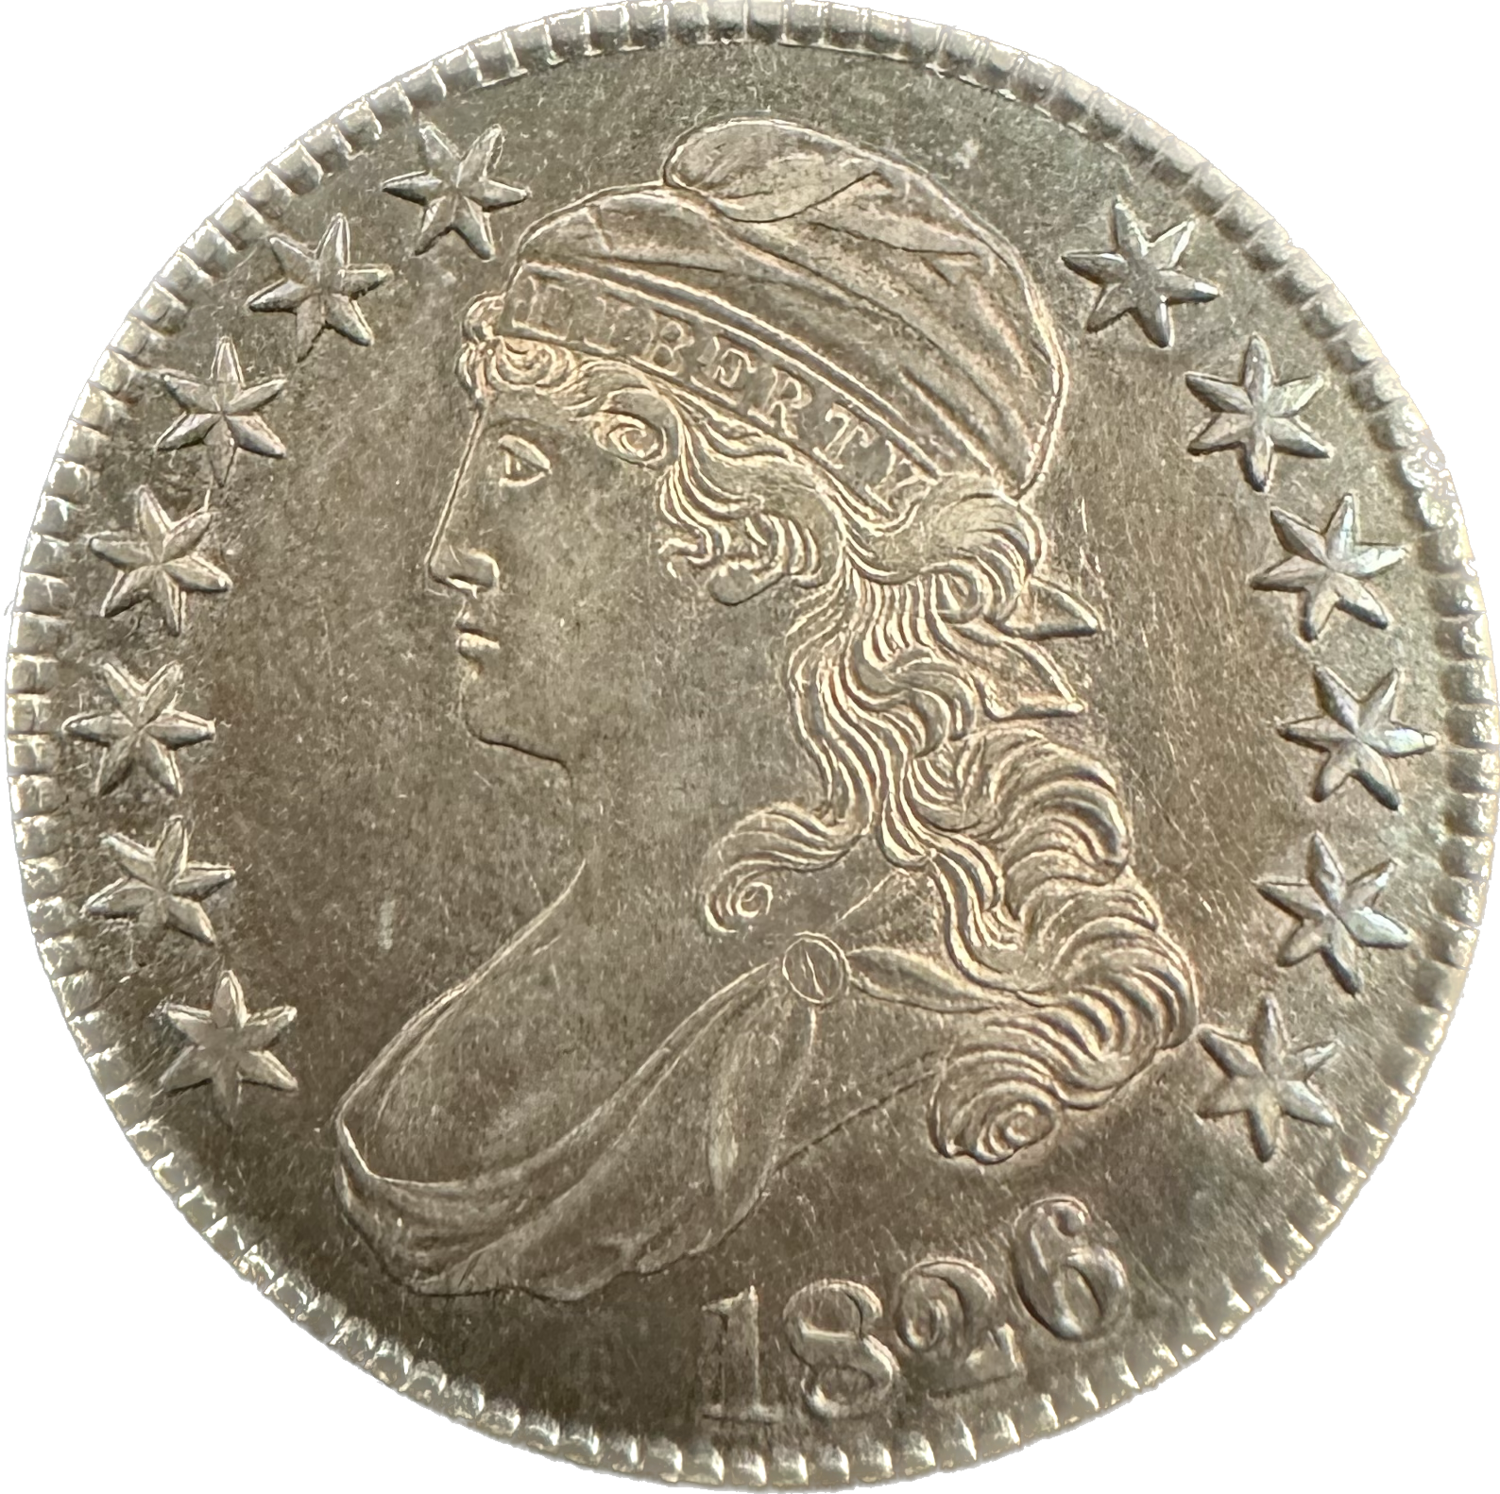 USA 50 Cents 1826 Capped Bust AU Coin